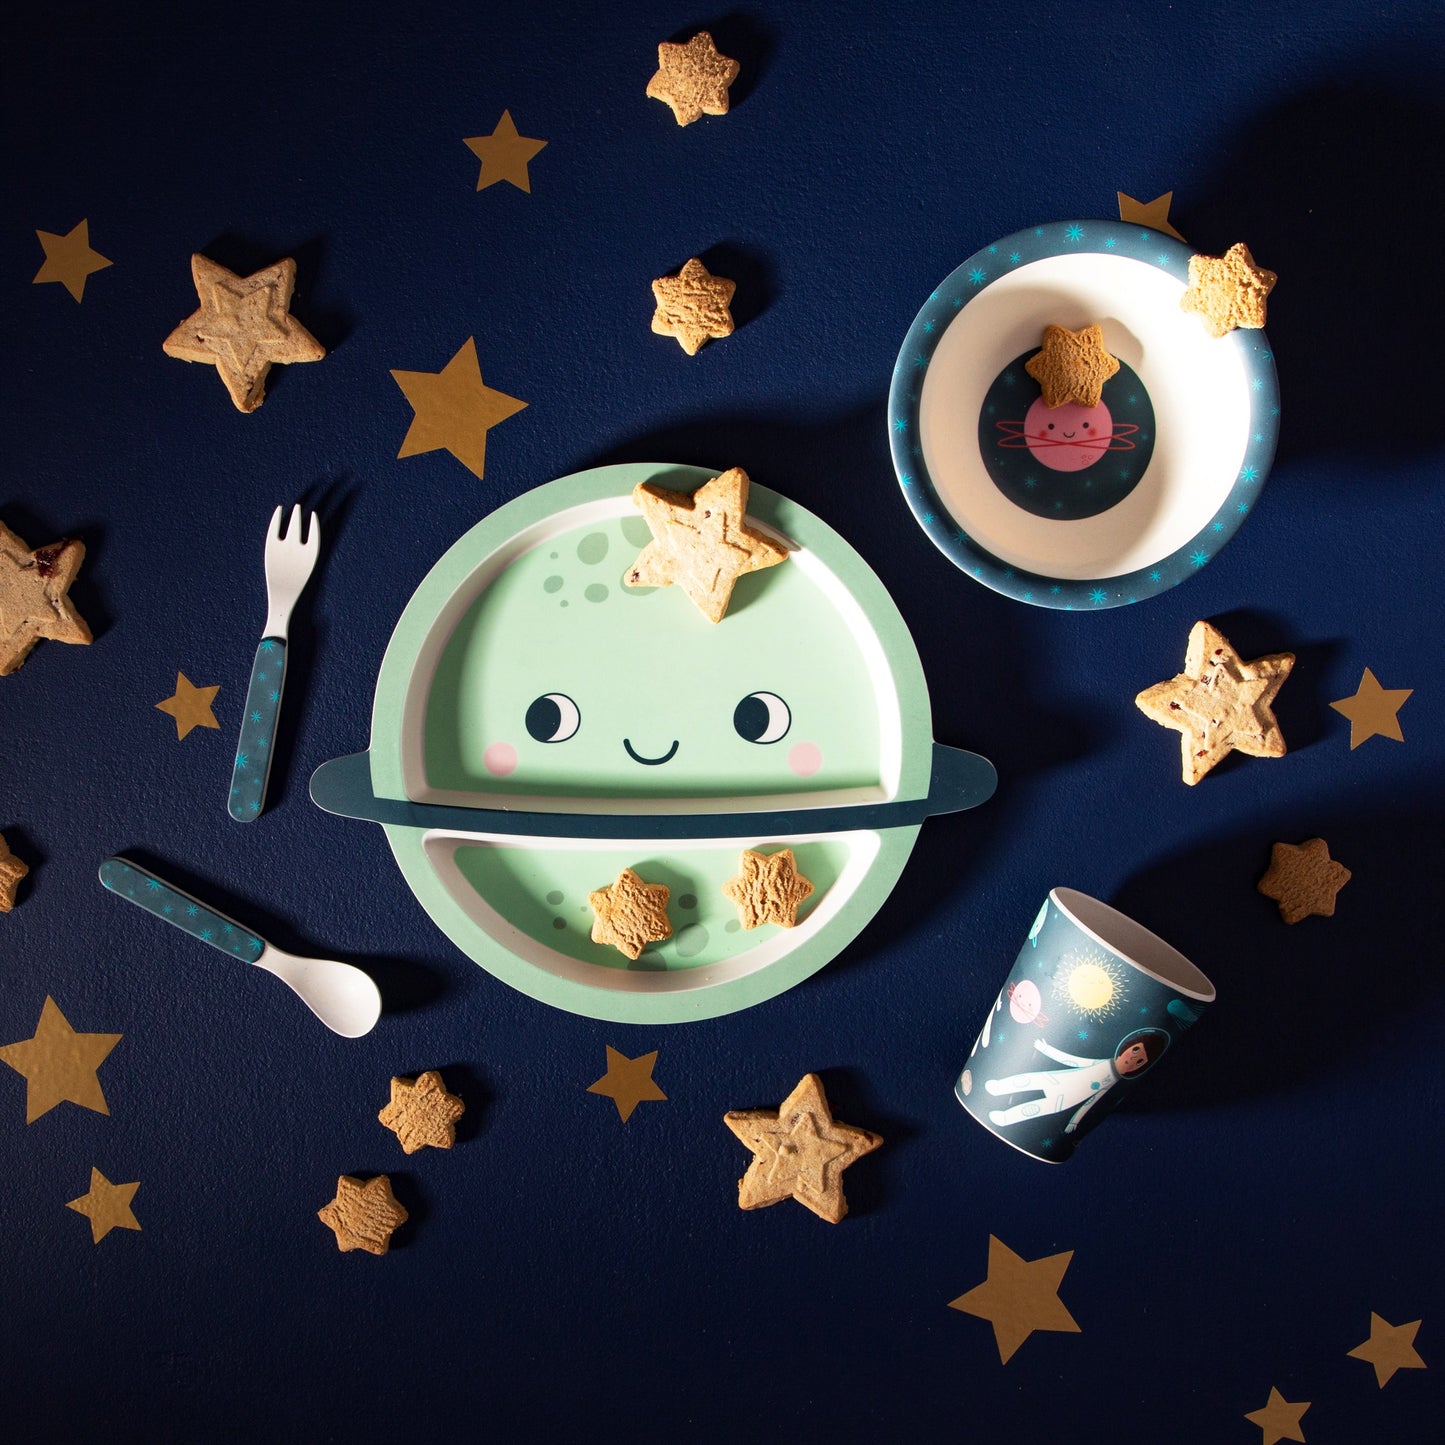 Explore space with this bamboo tableware and cutlery set in a midnight blue with neon bursts colour way, in a fun space explorer themed design.